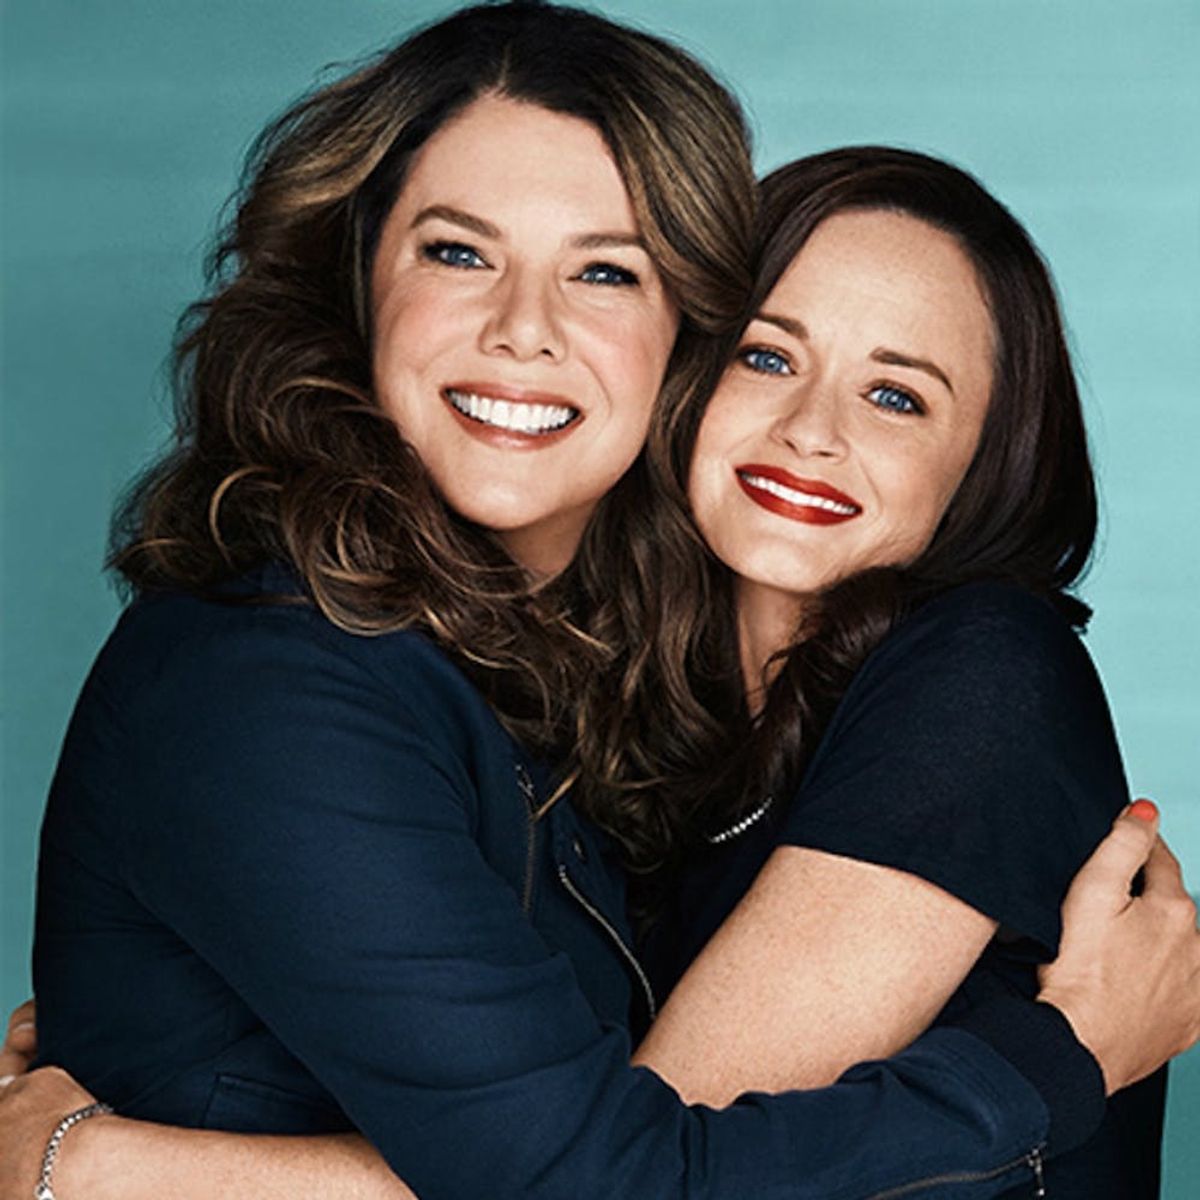 The New Gilmore Girls Featurette Will Make You Emotional AF